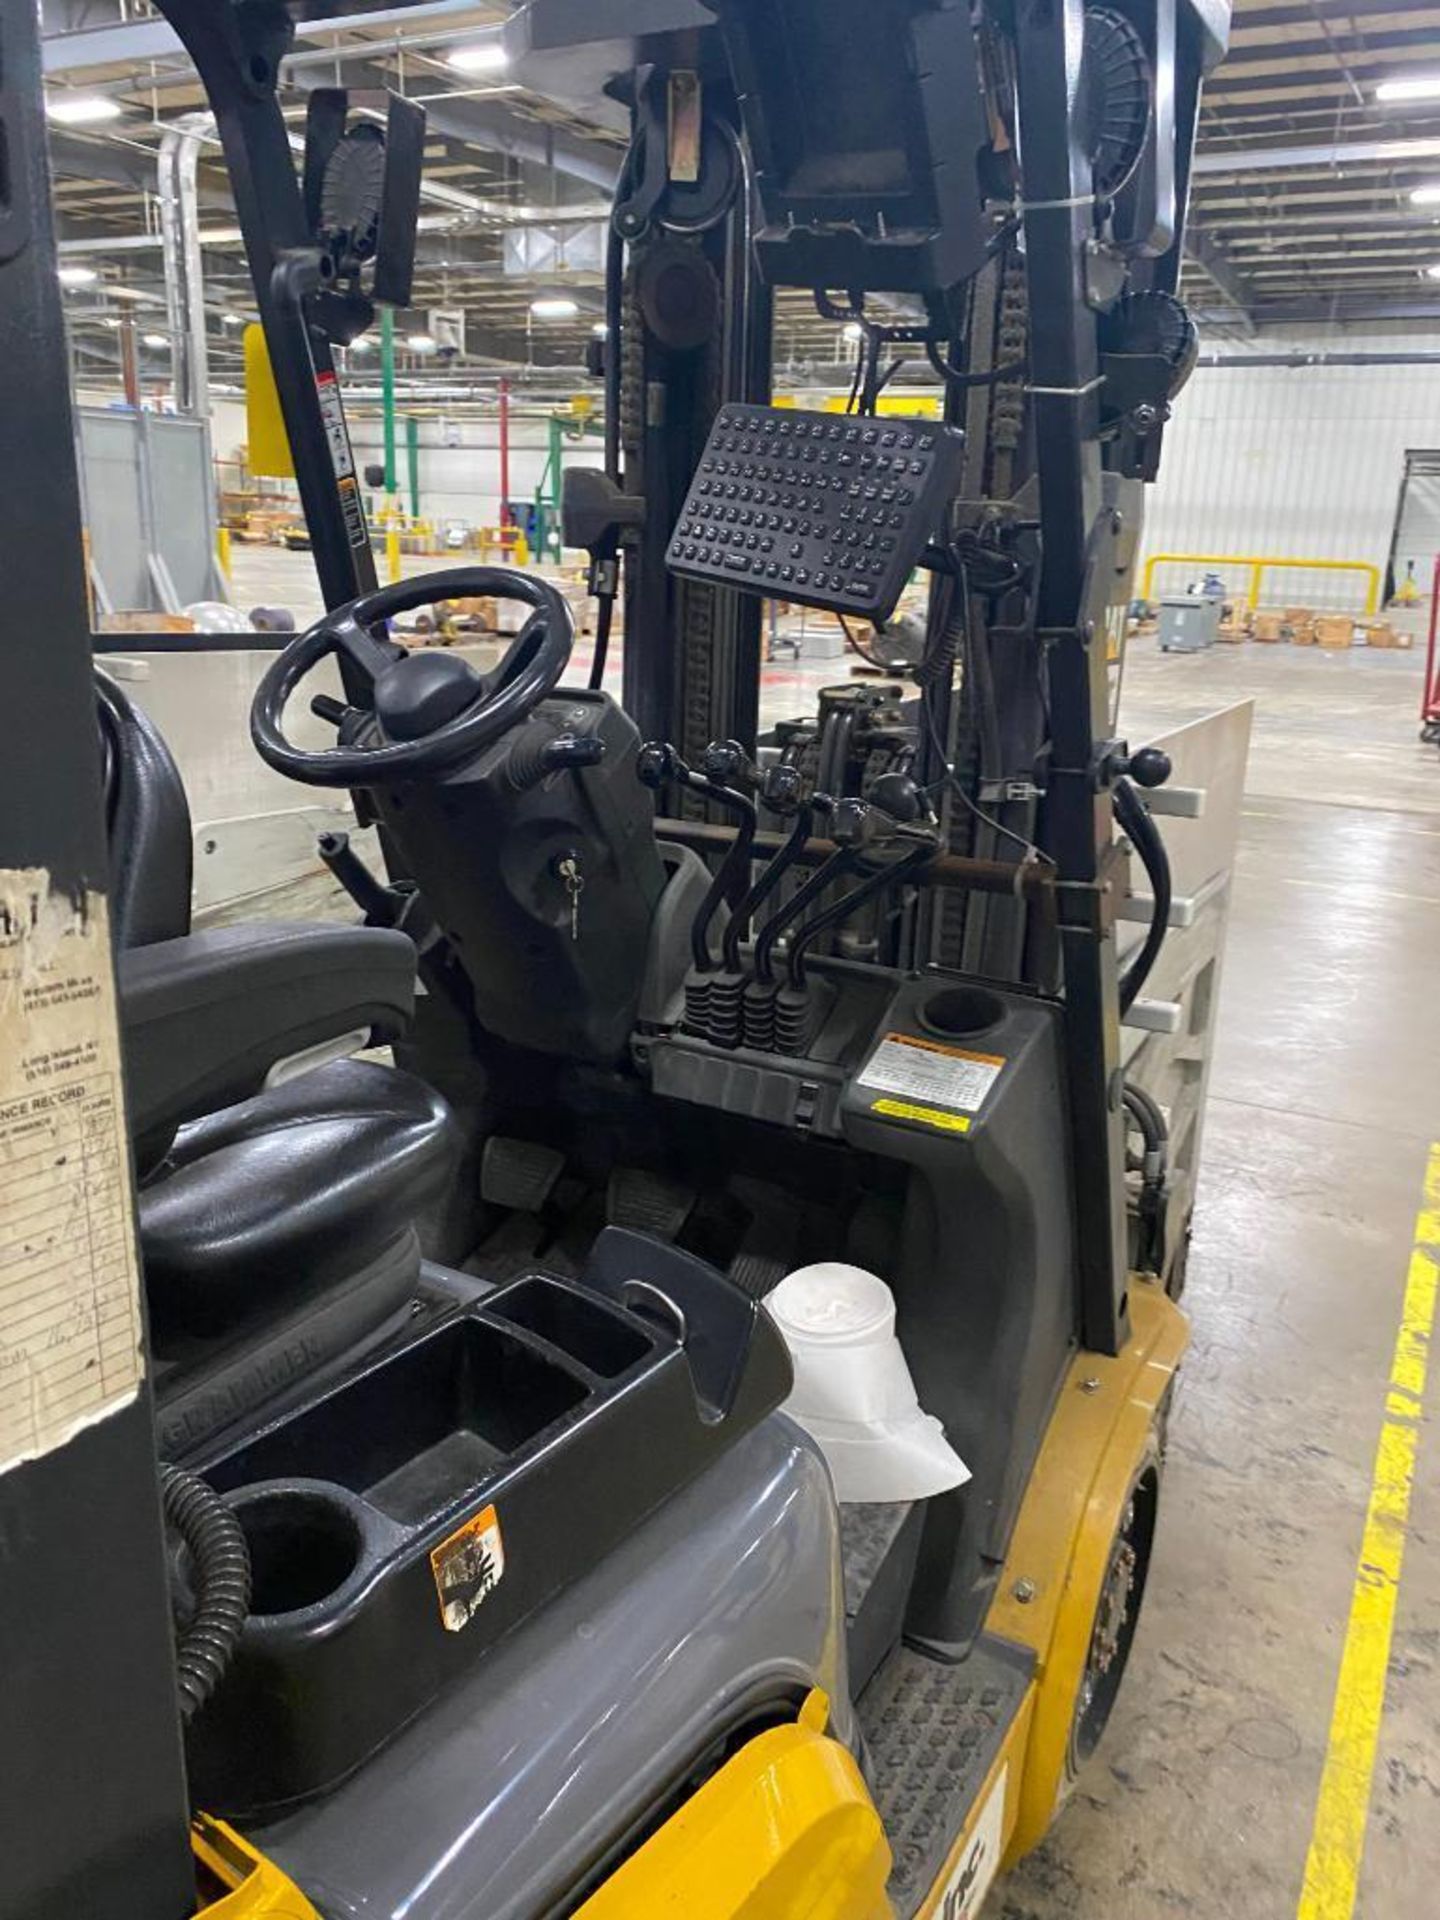 Caterpillar 2C5000 Forklift w/ Box Clamp, S/N AT9044555, 3-Stage Mast, Solid Non-Marking Tires, LP G - Image 3 of 8